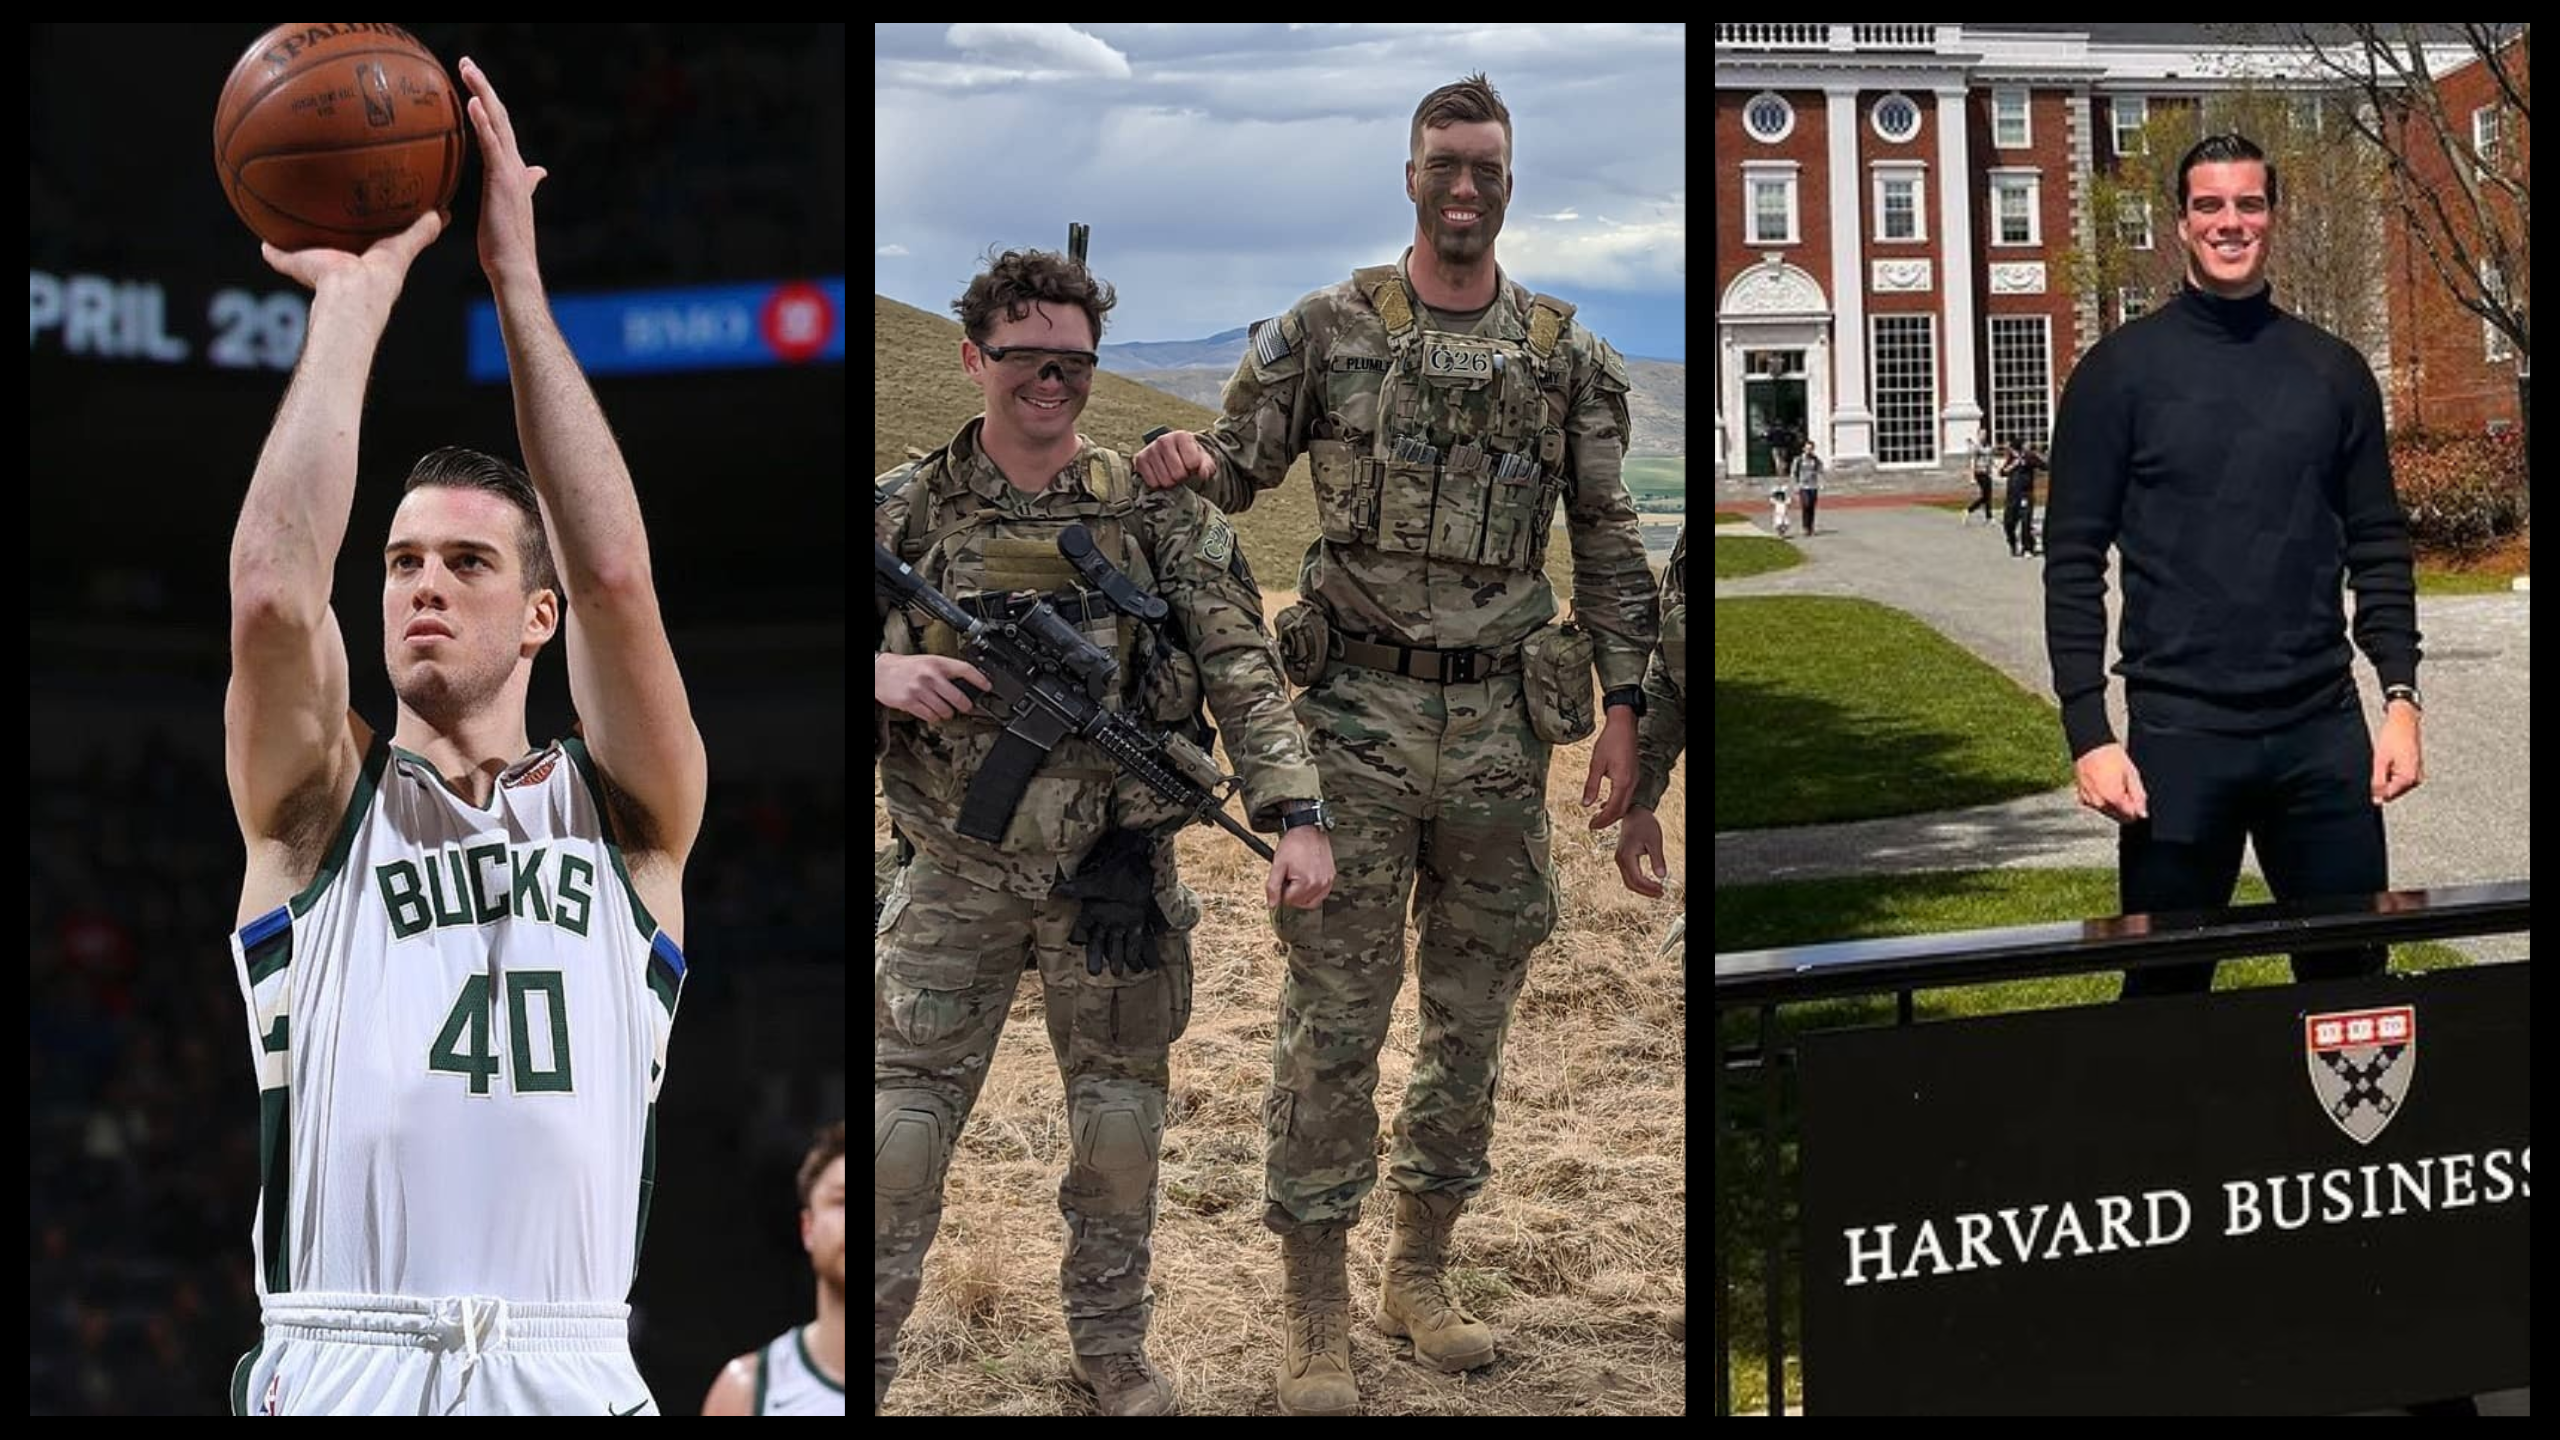 Famous athletes who are also military veterans